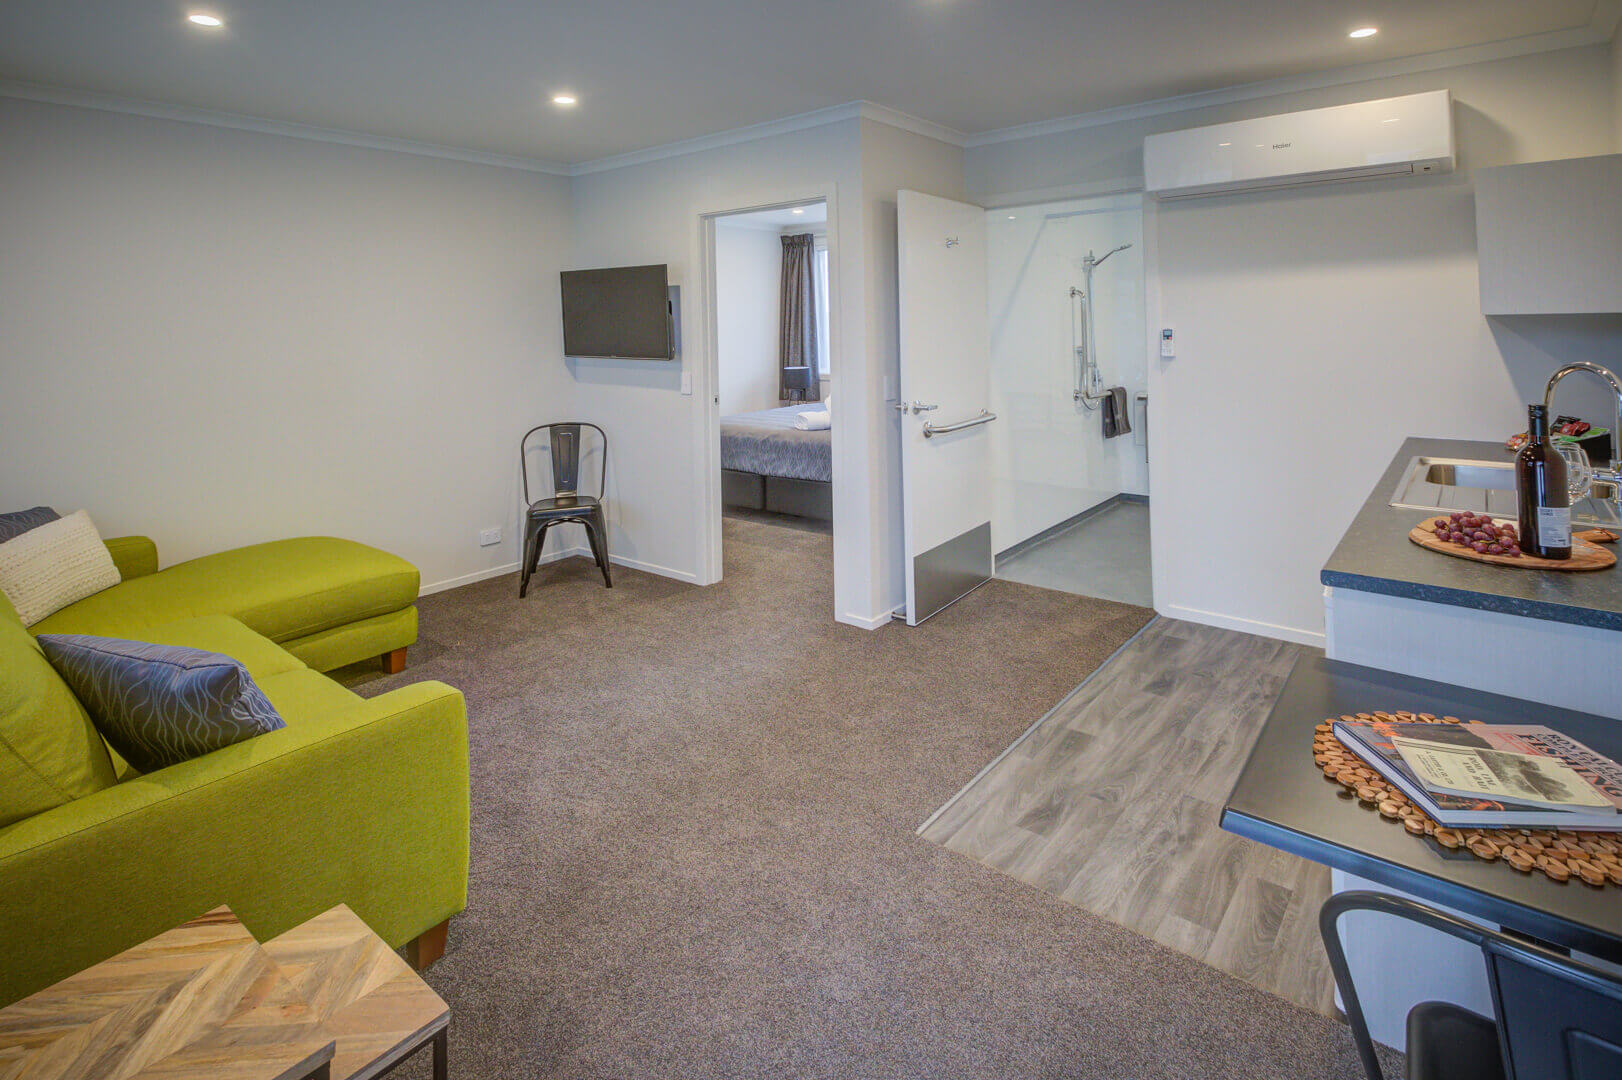 Interior of spacious, accessible motel suite with view to bedroom and bathroom from the living area.